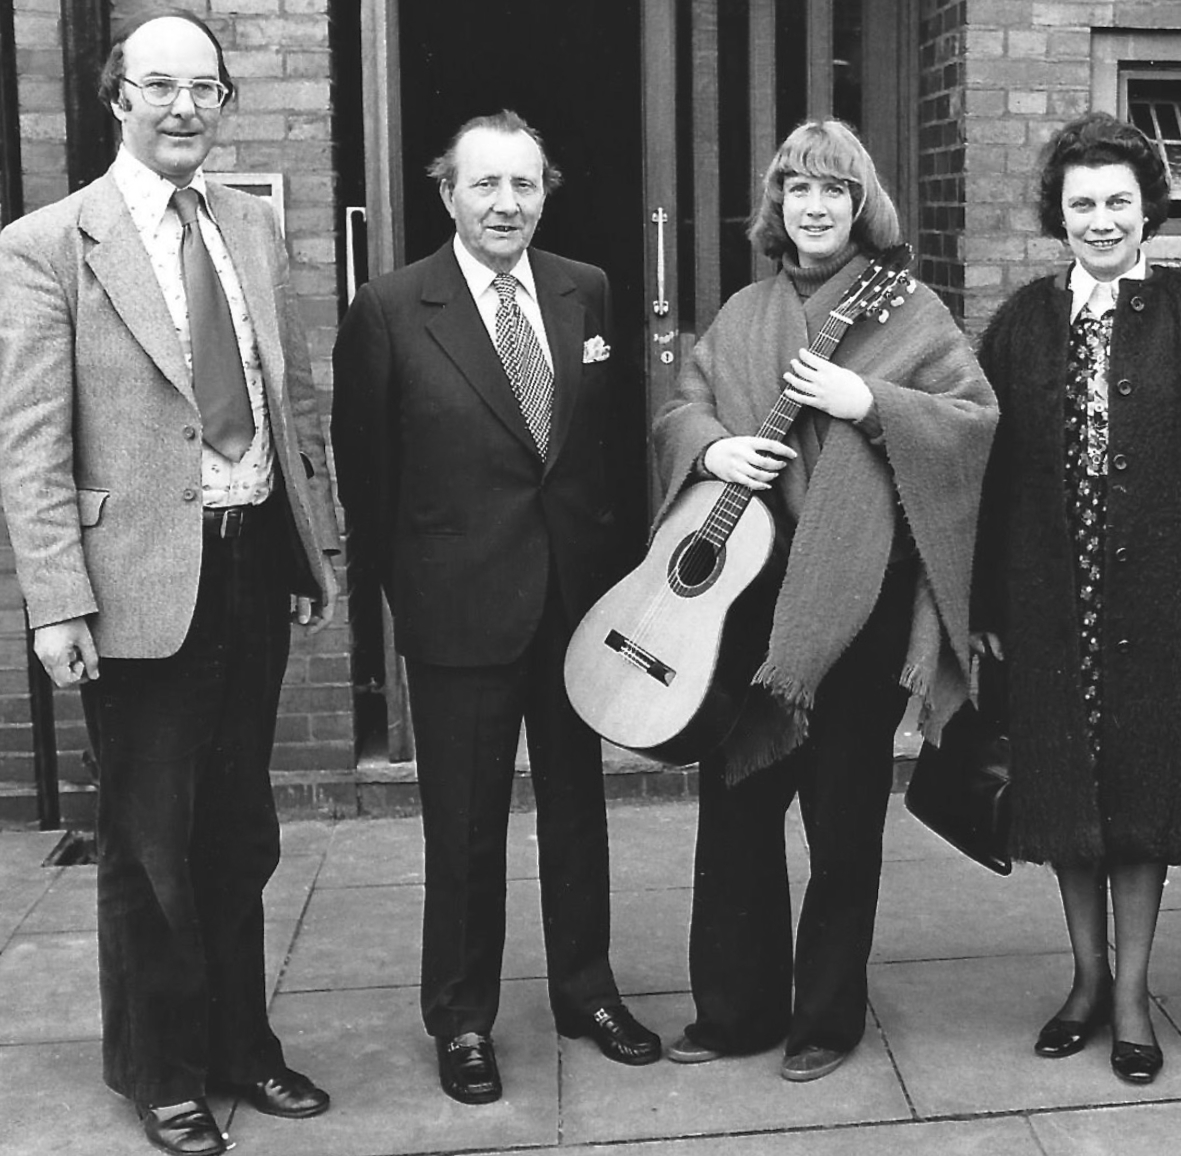 Peter Dickinson (left) with Lennox and Freda Berkeley and the guitarist Alice Artzt, at Keele University, 1978